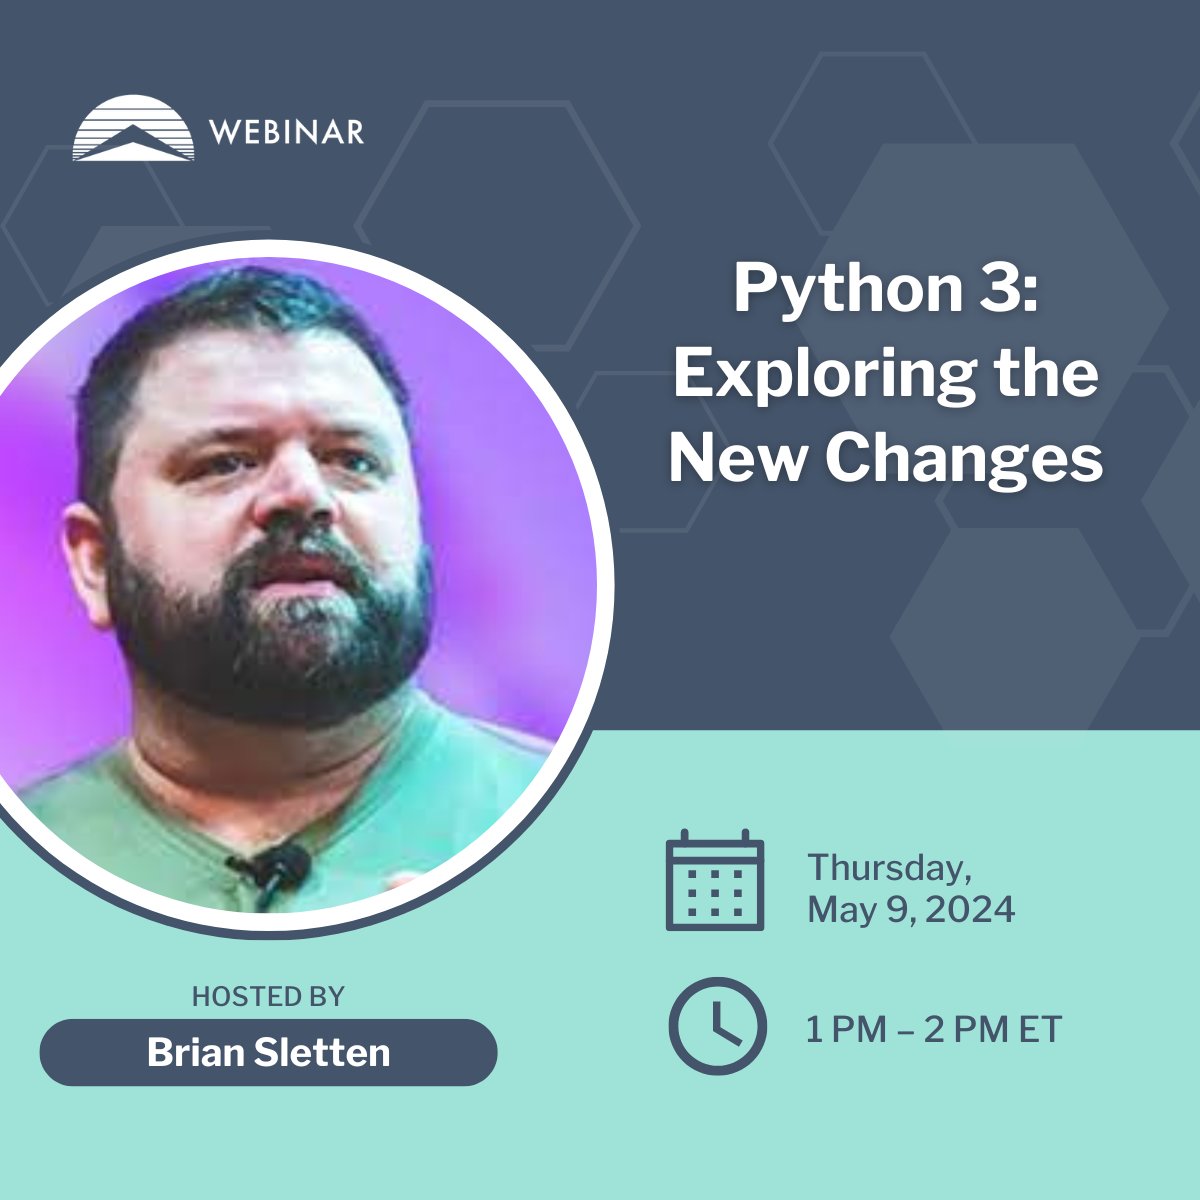 Explore Python's latest version with us today! 🐍 In this webinar, we will highlight how Python 3's advancements improve performance and user experience. Developers won't want to miss it! 
apexsystems.com/event/toolbox-… #PythonDevelopers #CodingLife #Webinar  #DeveloperCommunity